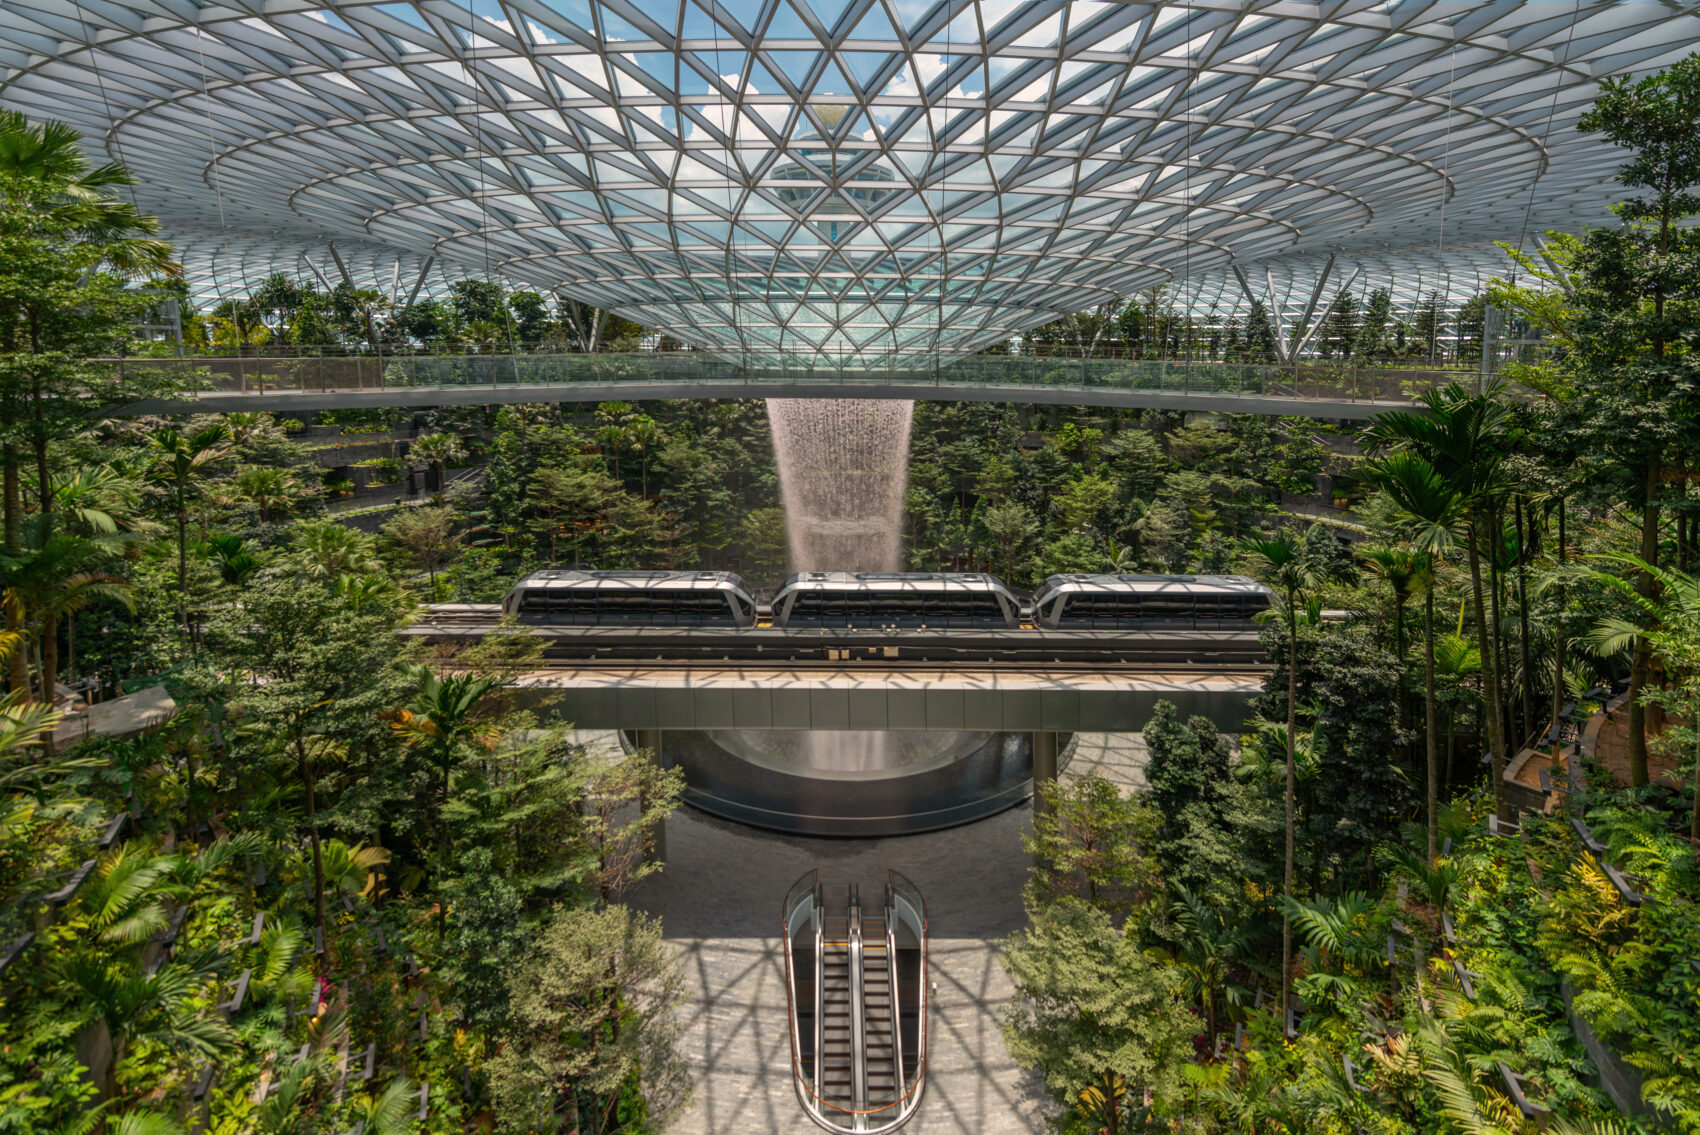 Shiseido Forest Valley and Rain Vortex from South Viewing Deck, Singapore Changi Jewel Terminal